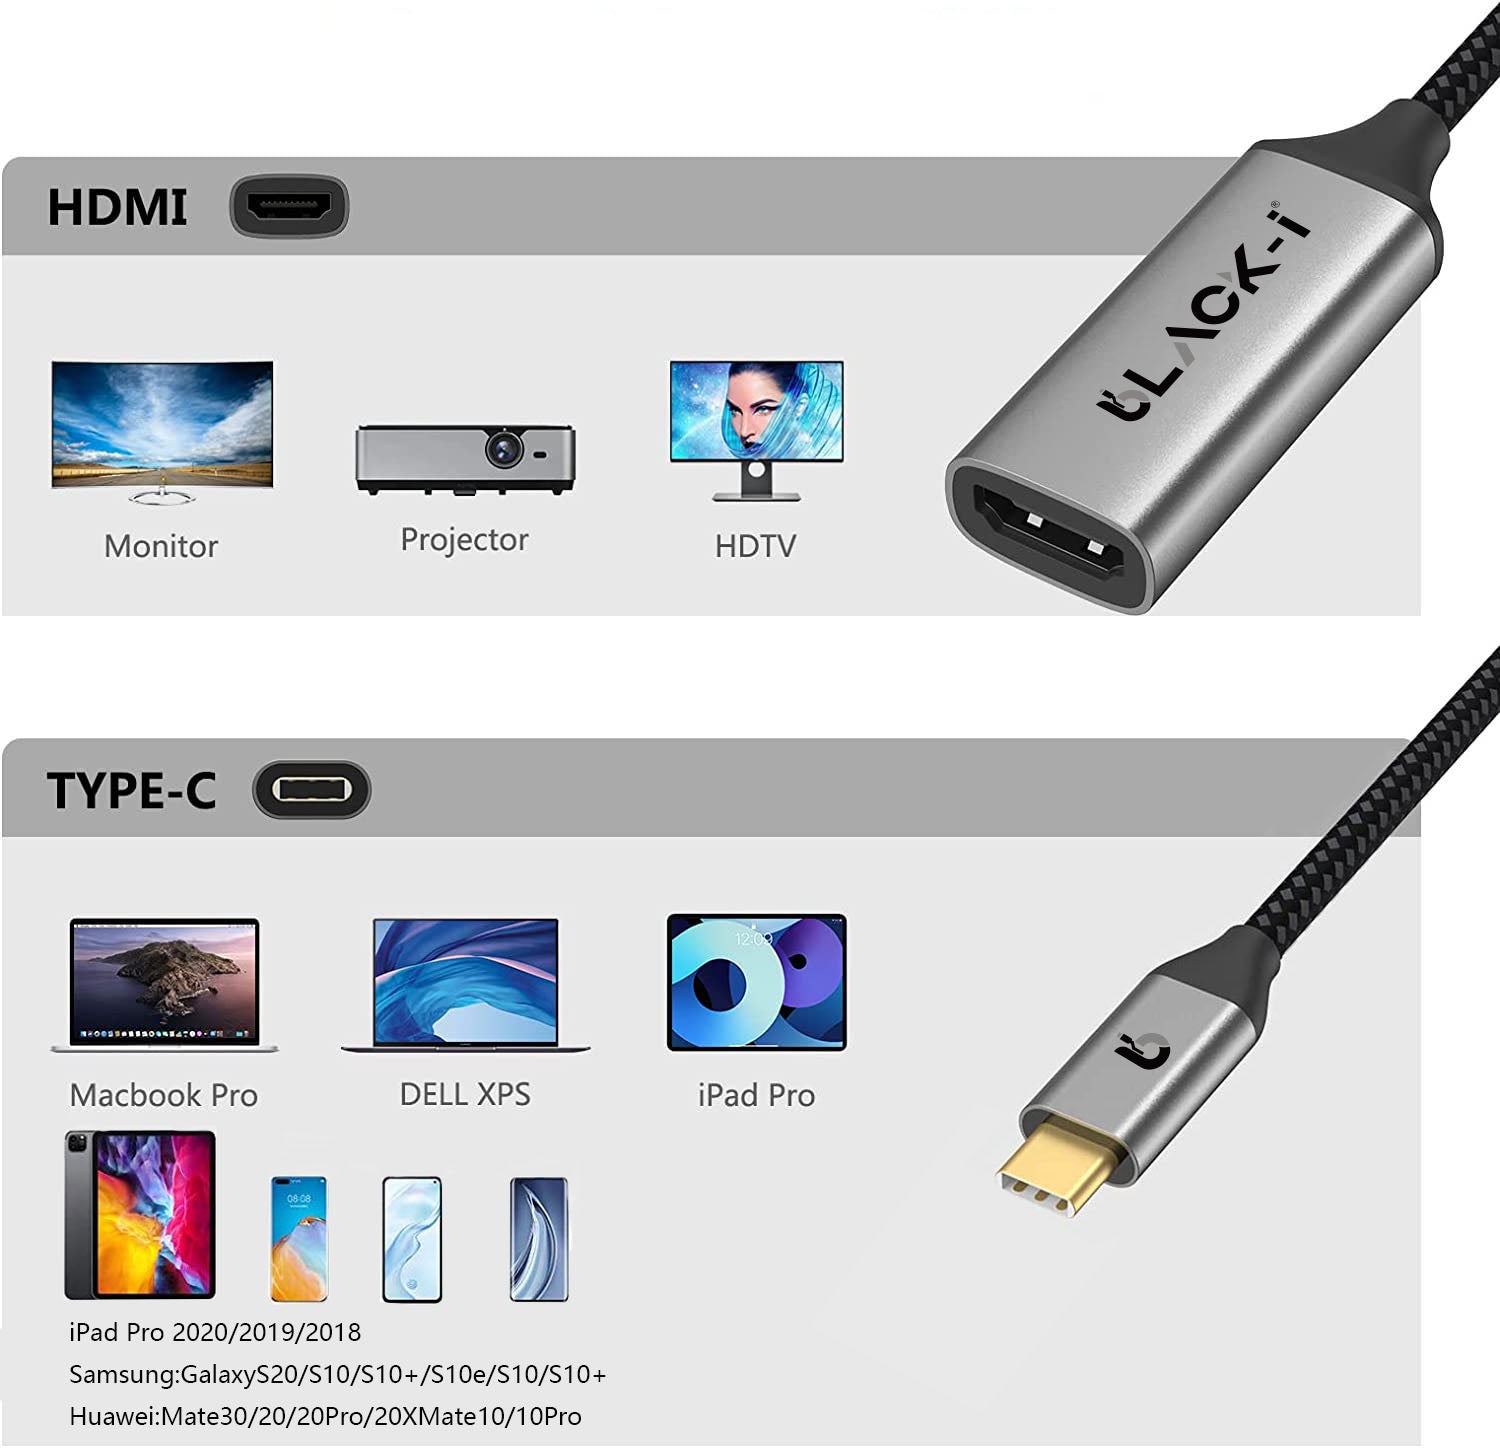 Black-i USB-C to HDMI 4K Converter – Elevate Your Visual Experience with Crisp 4K Connectivity in a Modern Design